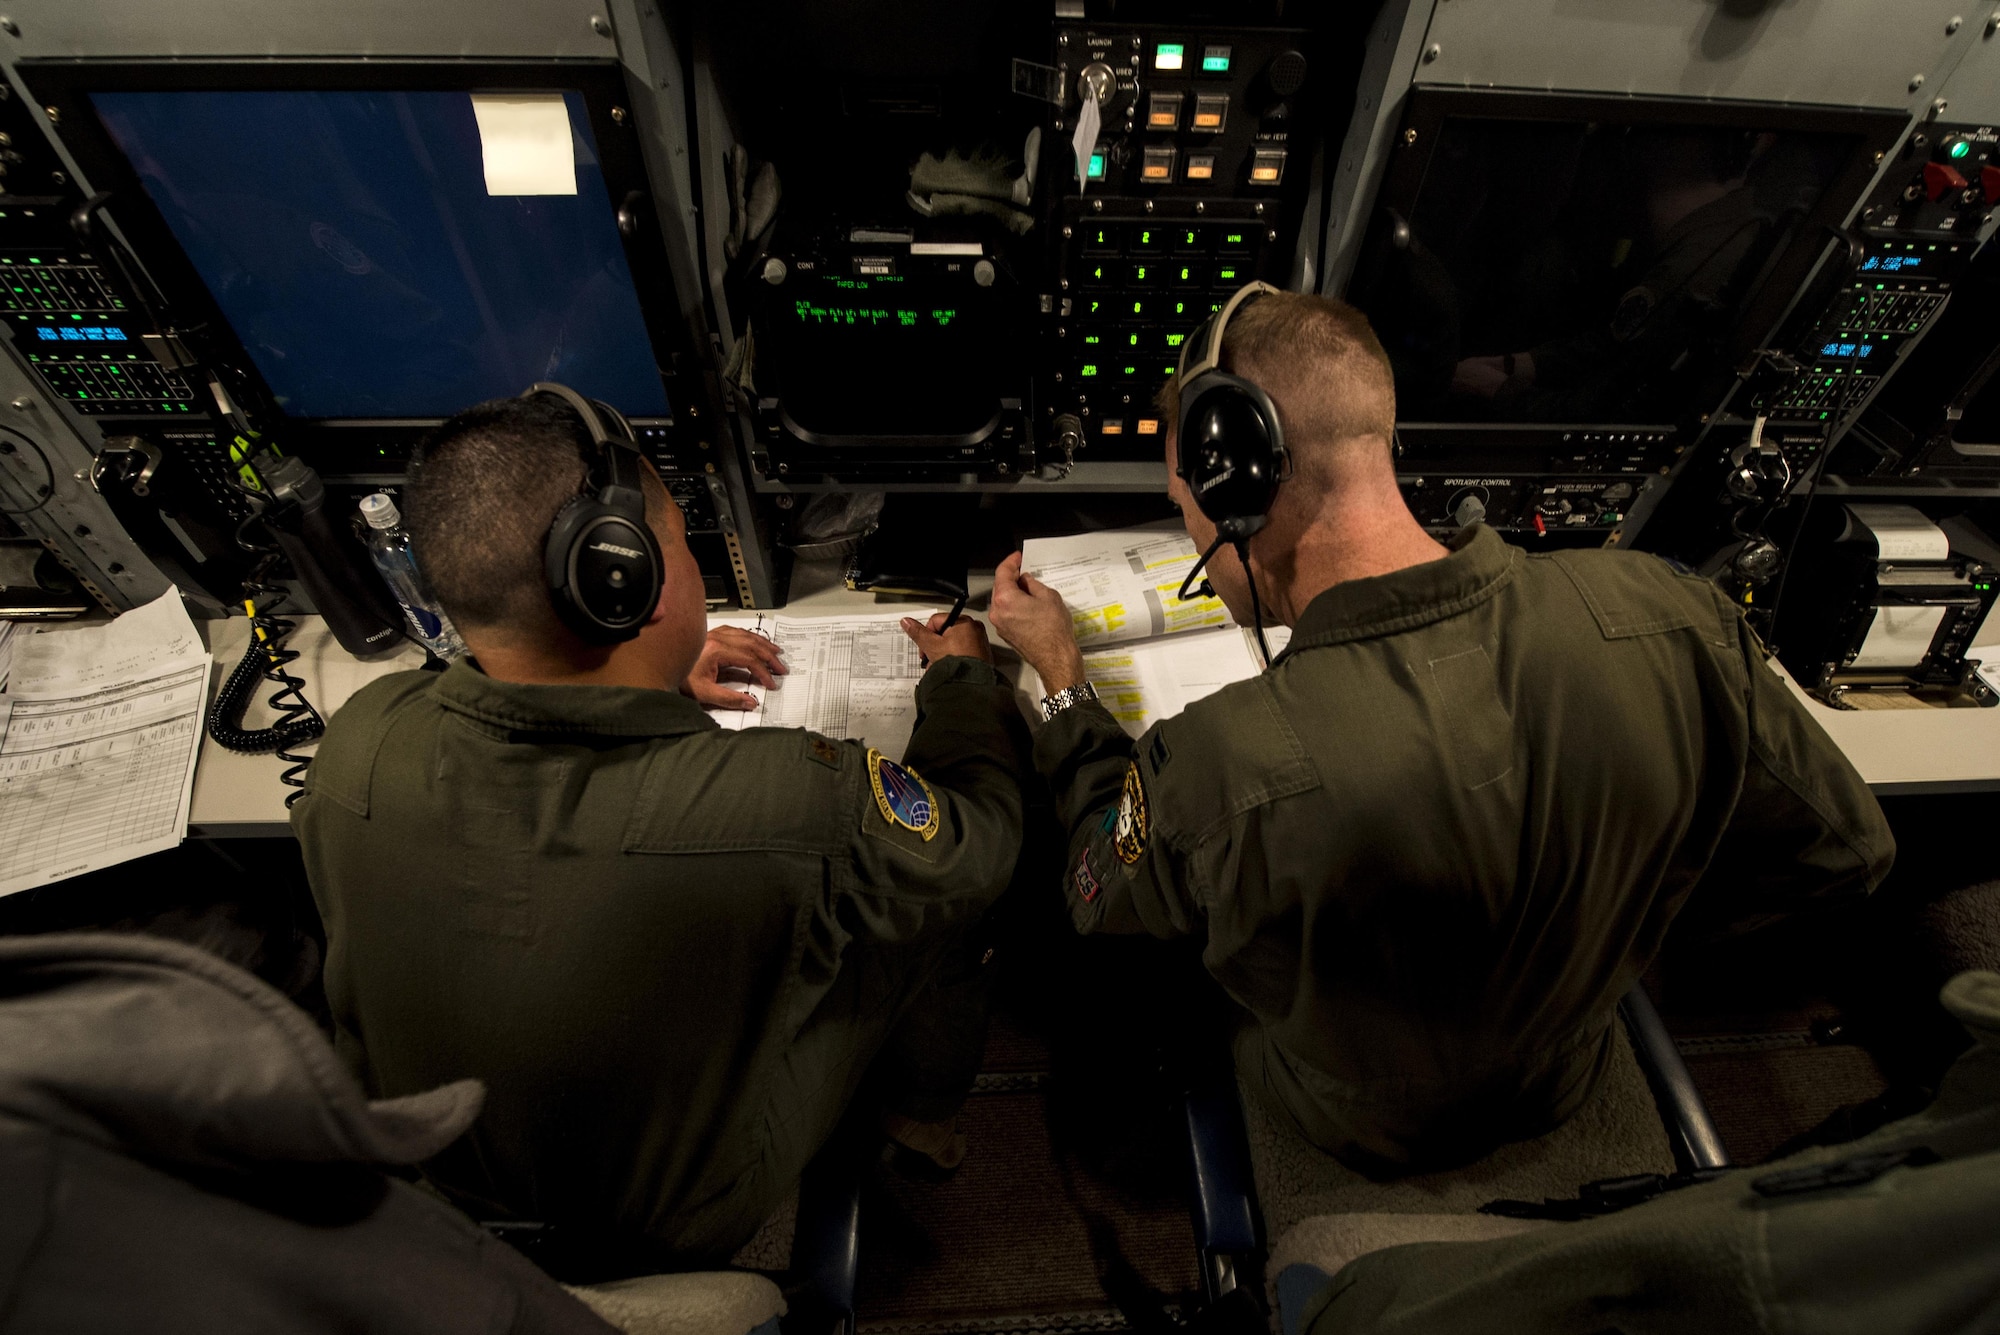 U.S. Air Force Maj. Izzy Remo, left, a test conductor-airborne, and U.S. Air Force Capt. Greg Carter, right, a deputy missile combat crew commander-airborne, both from the 625th Strategic Operations Squadron, go over missile launch procedures during Glory Flight 220 above the Pacific Ocean, April 26, 2017. Glory Trip is an operational test launch which continues a long history of launches from Vandenberg Air Force Base, Calif., used to verify, validate and improve the capability of the nation’s ICBM force. (Photo edited for security) (U.S. Air Force photo by Airman 1st Class Keifer Bowes)